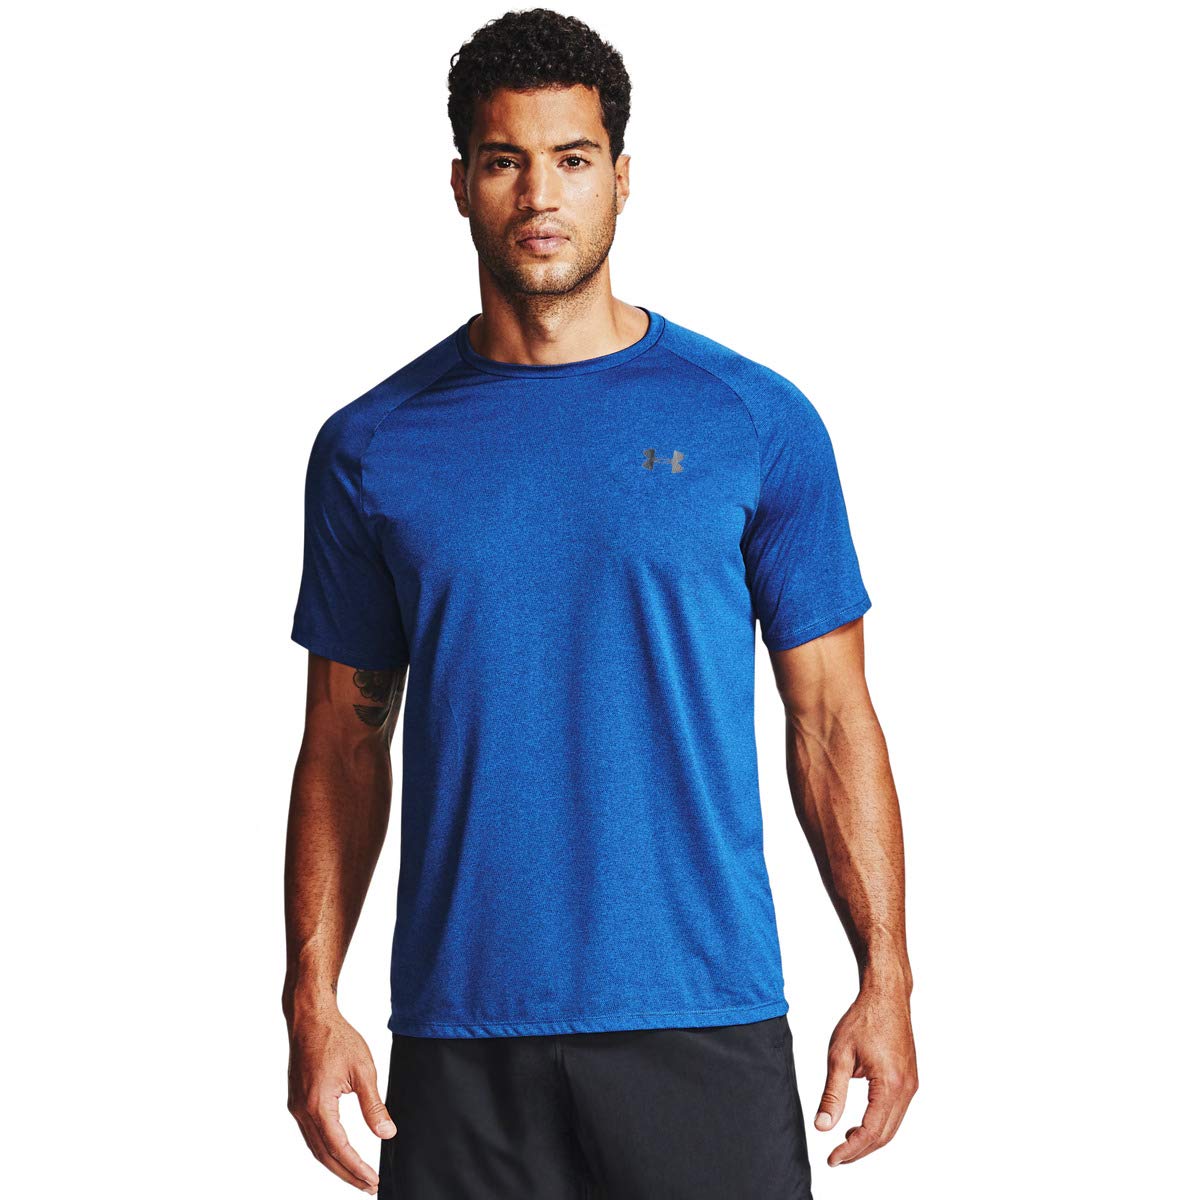 Under Armour Men's Tech 2.0 Novelty Short-Sleeve T-Shirt (Royal Blue) $12.97 + Free Shipping w/ Prime or on $35+